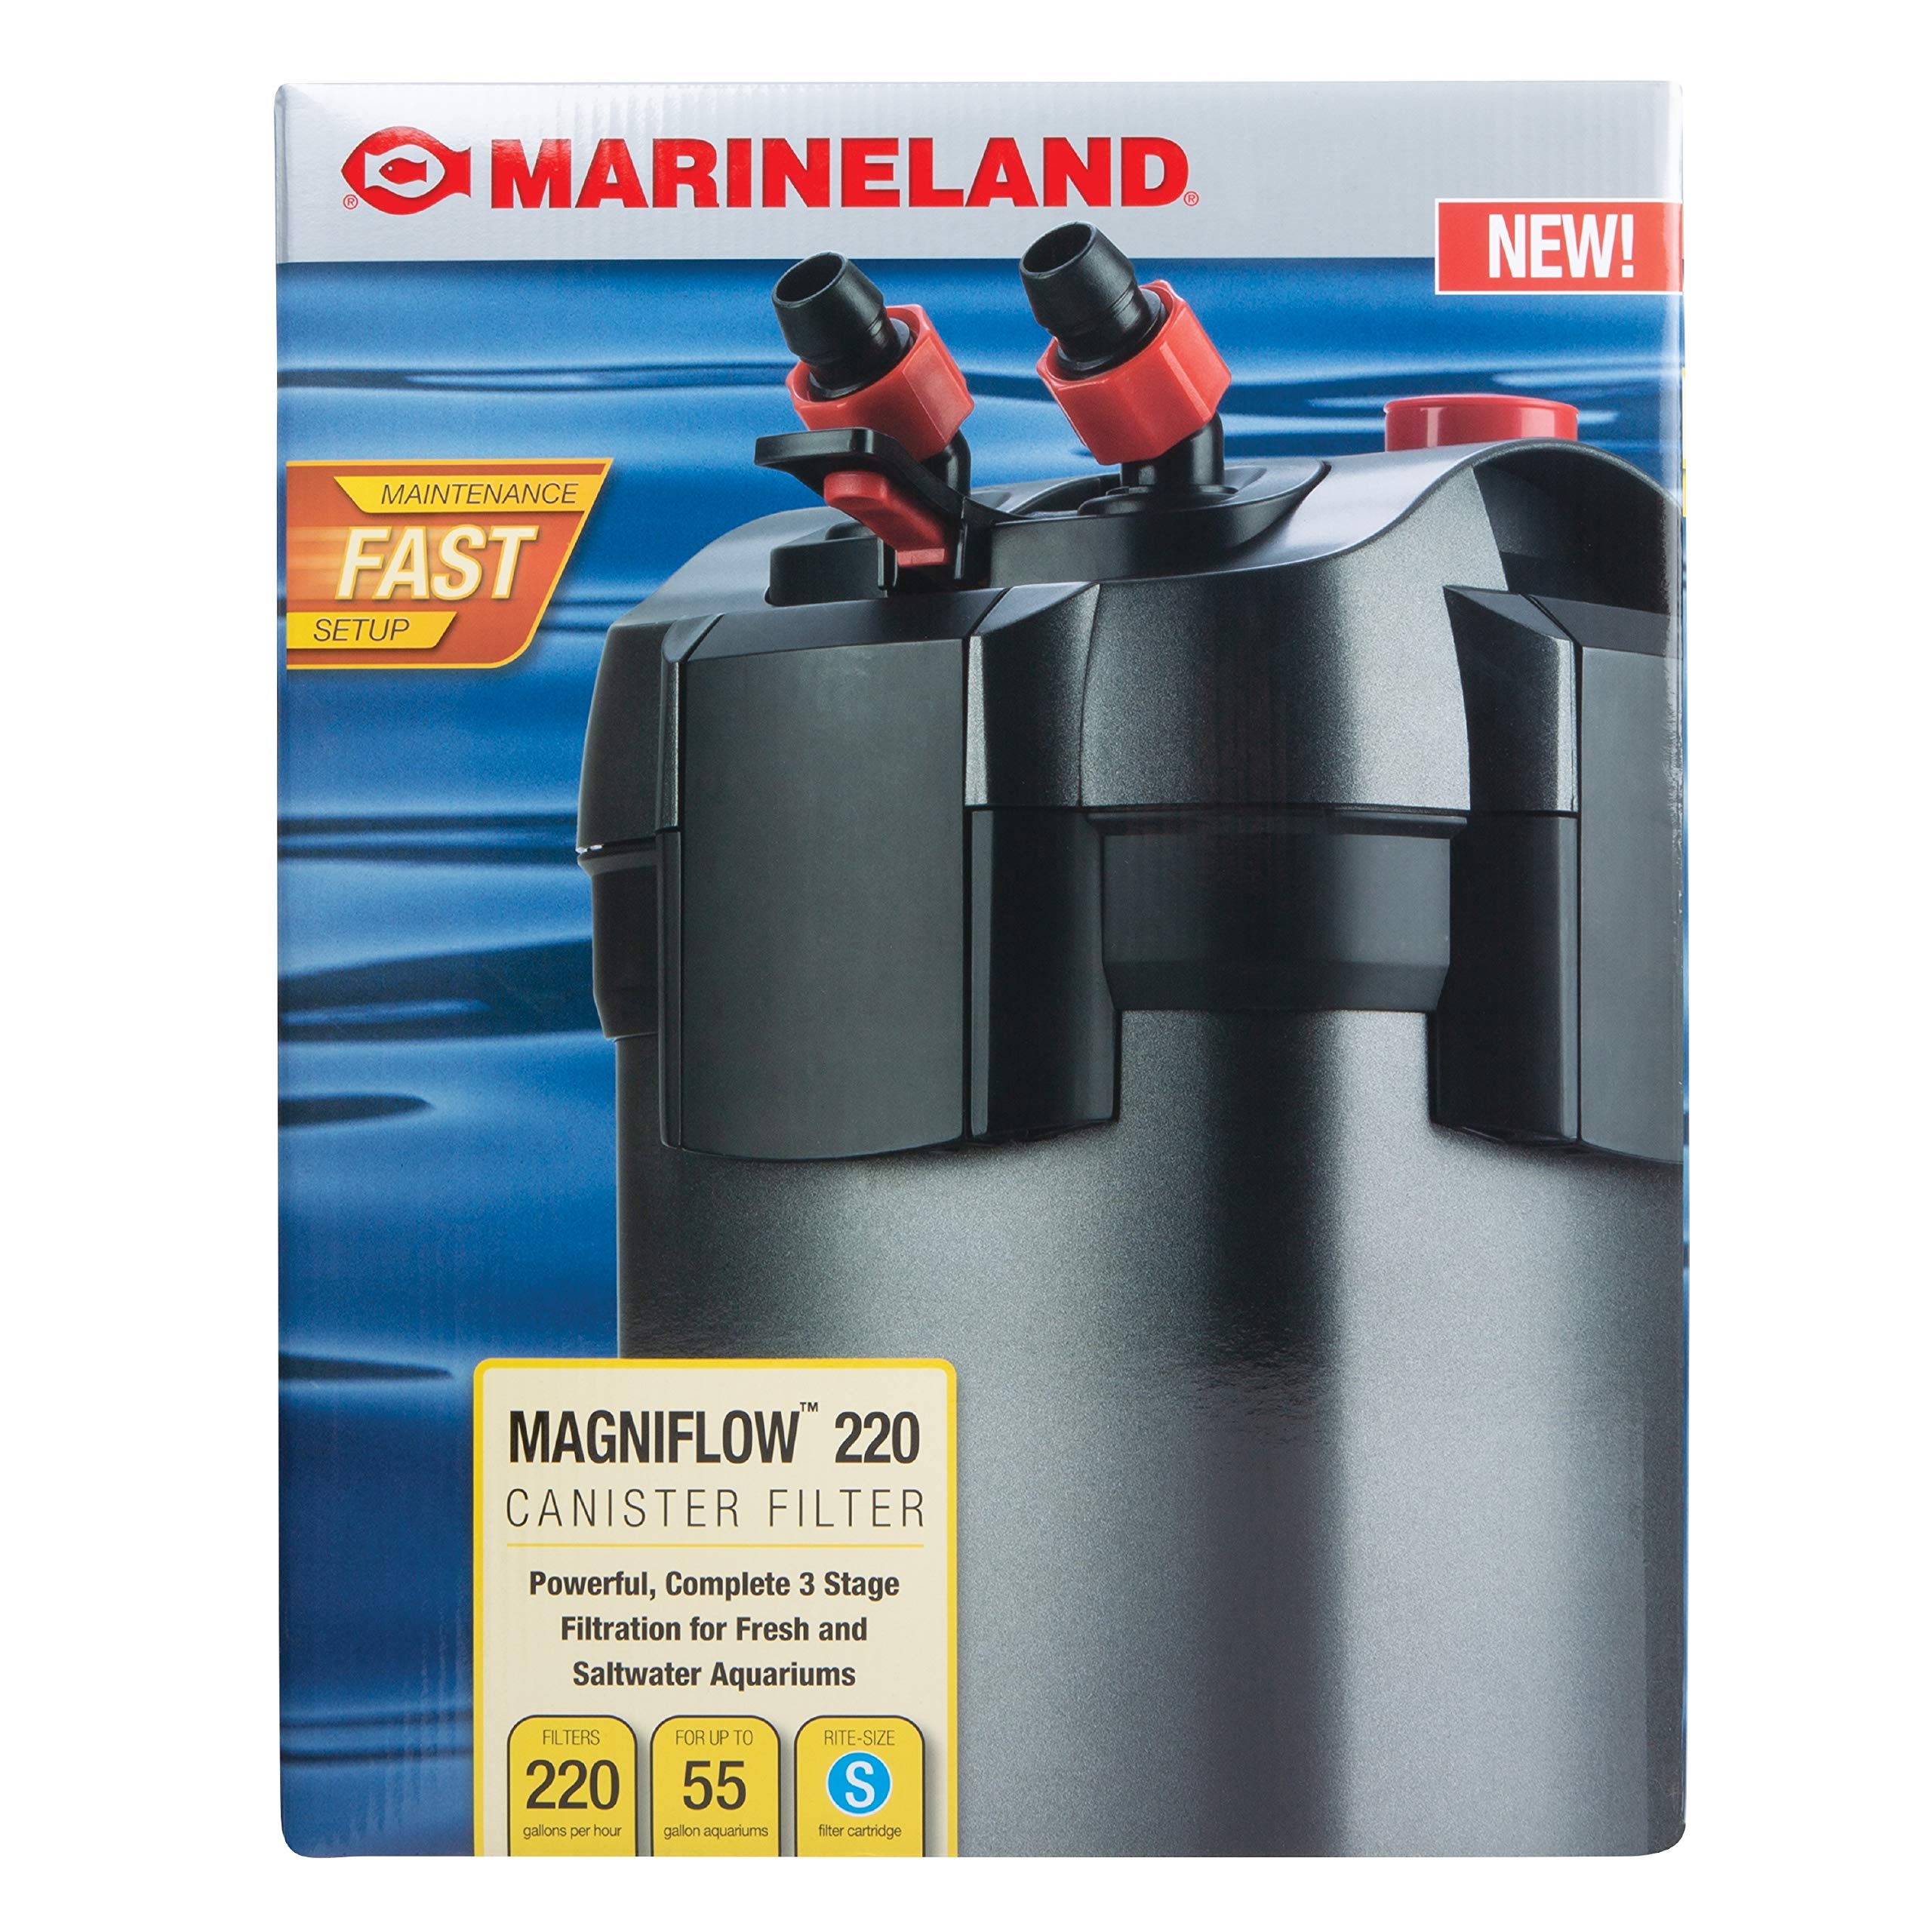 Marineland Magniflow Canister Filter: Easy Maintenance for Aquariums, 220 GPH.